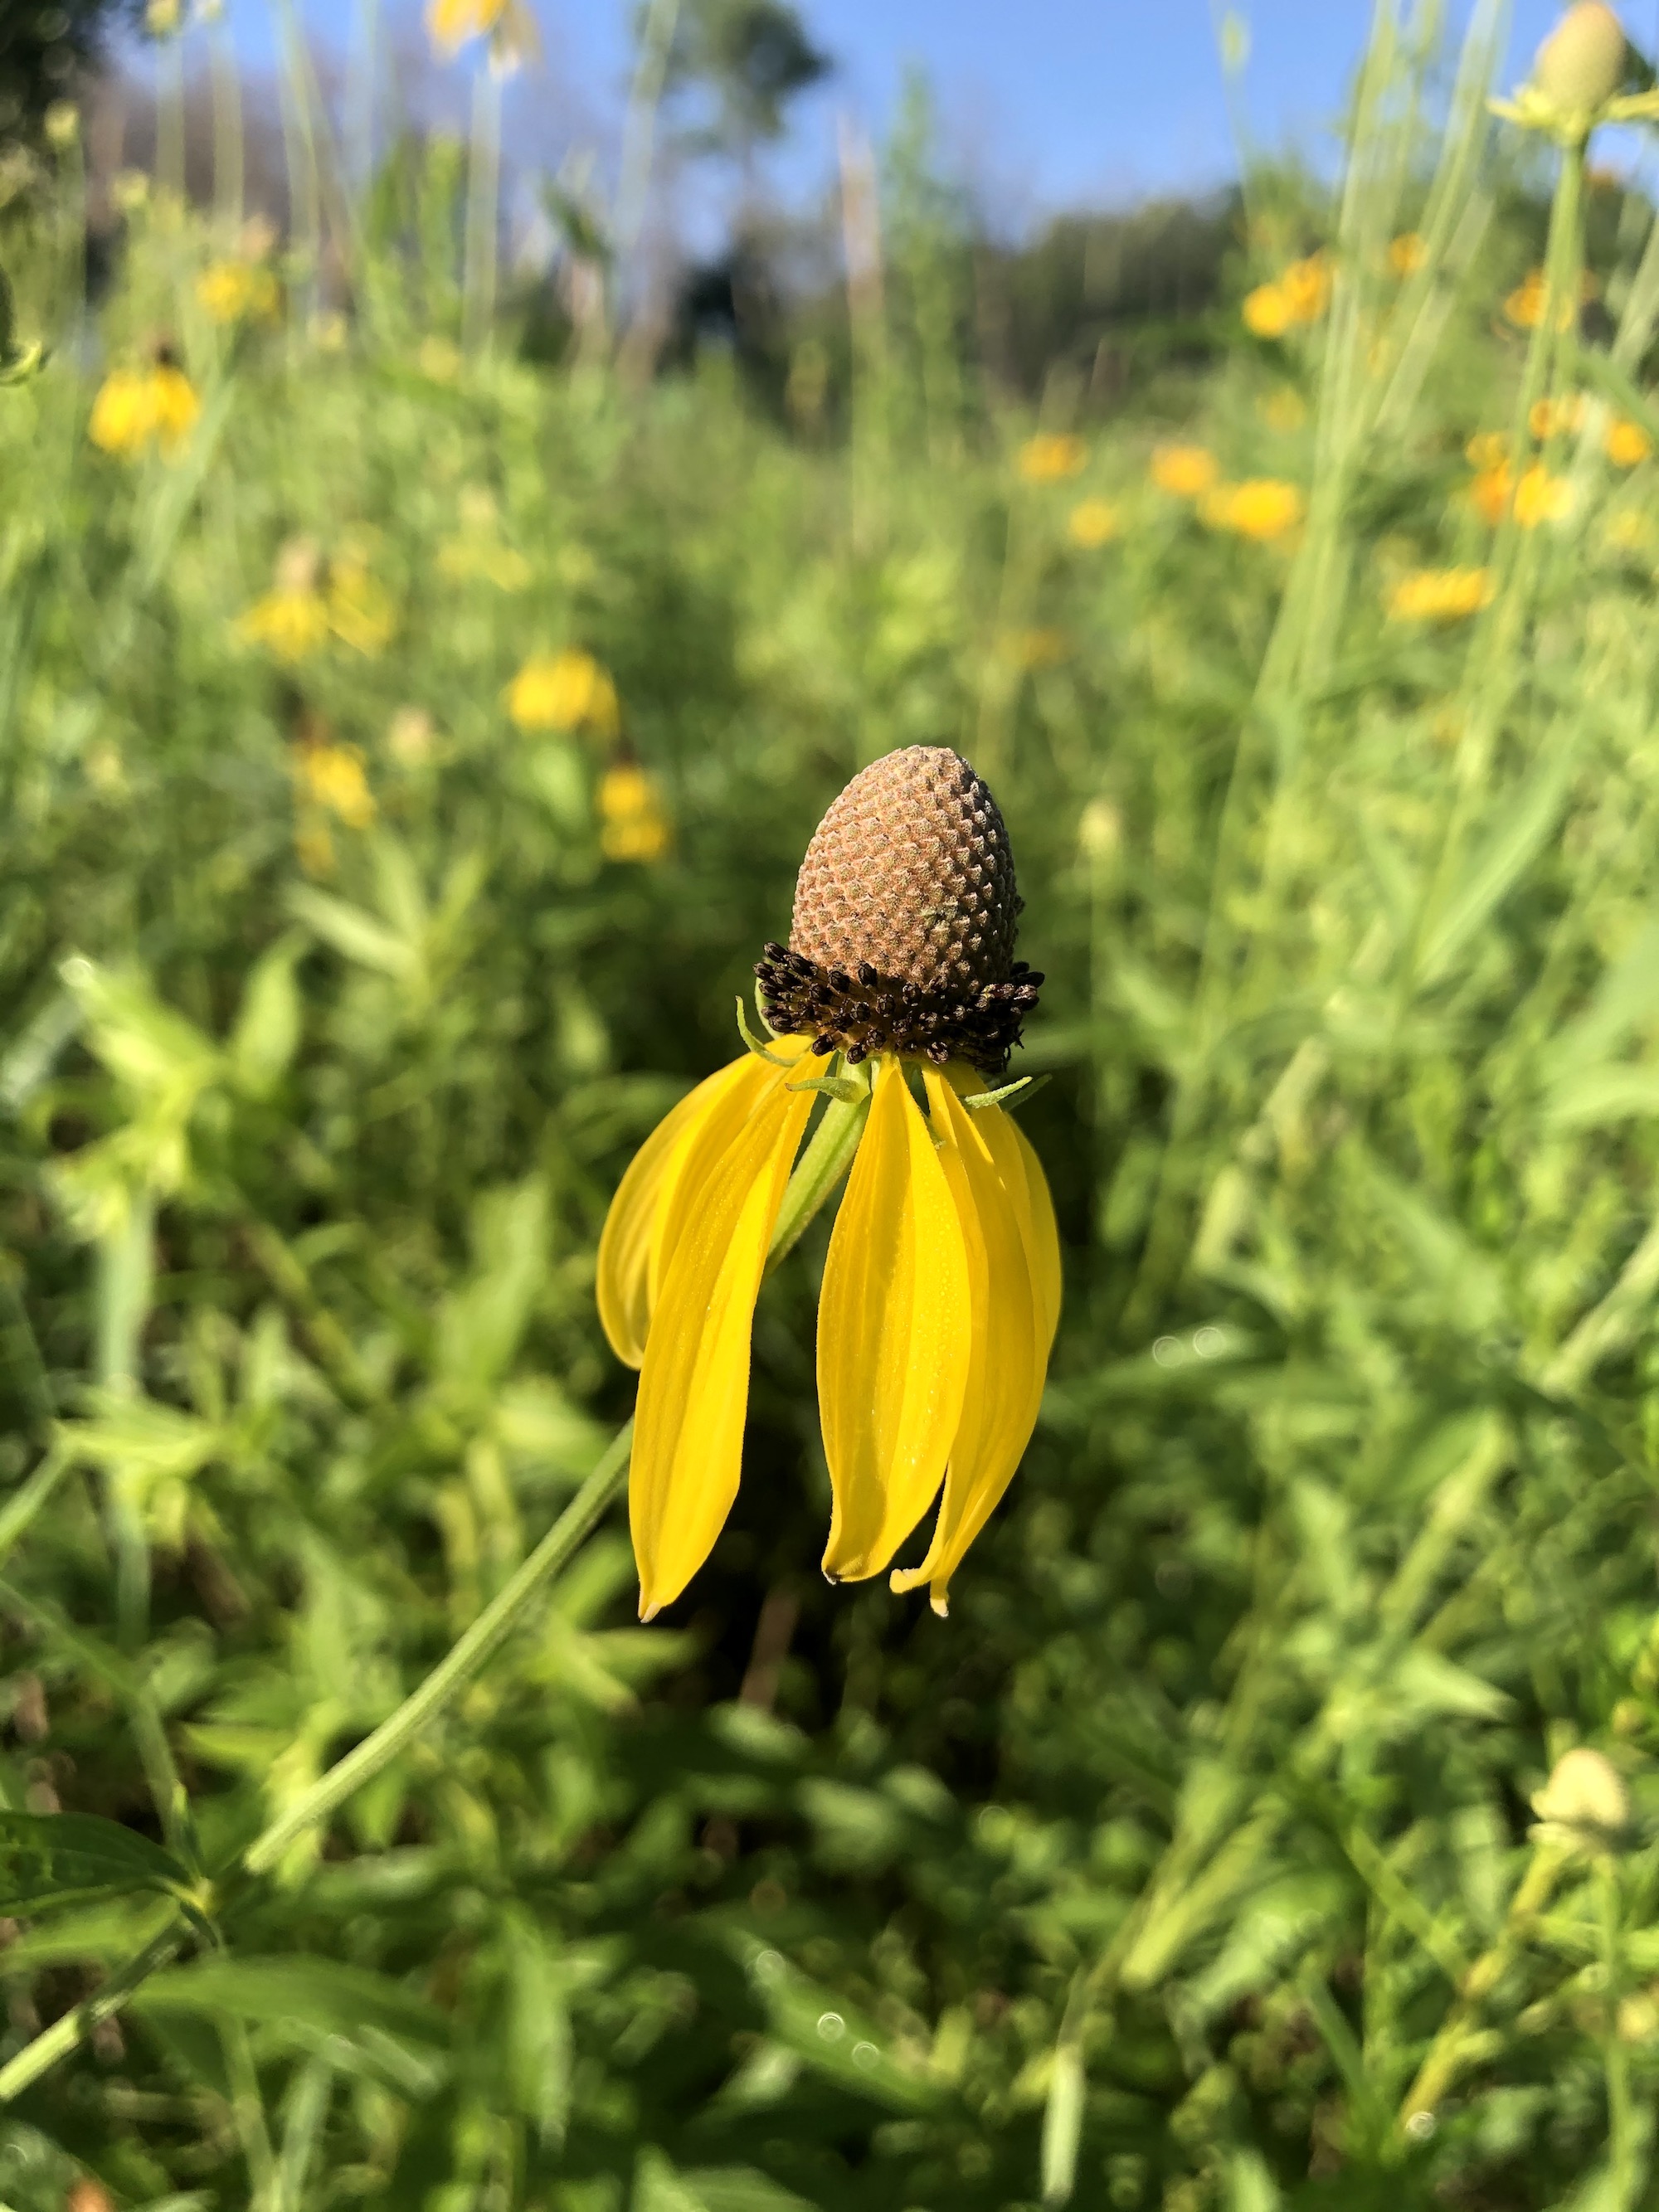 Gray-headed coneflower on shore of Marion Dunn Pond in Madison, Wisconsin on  July 17, 2020.